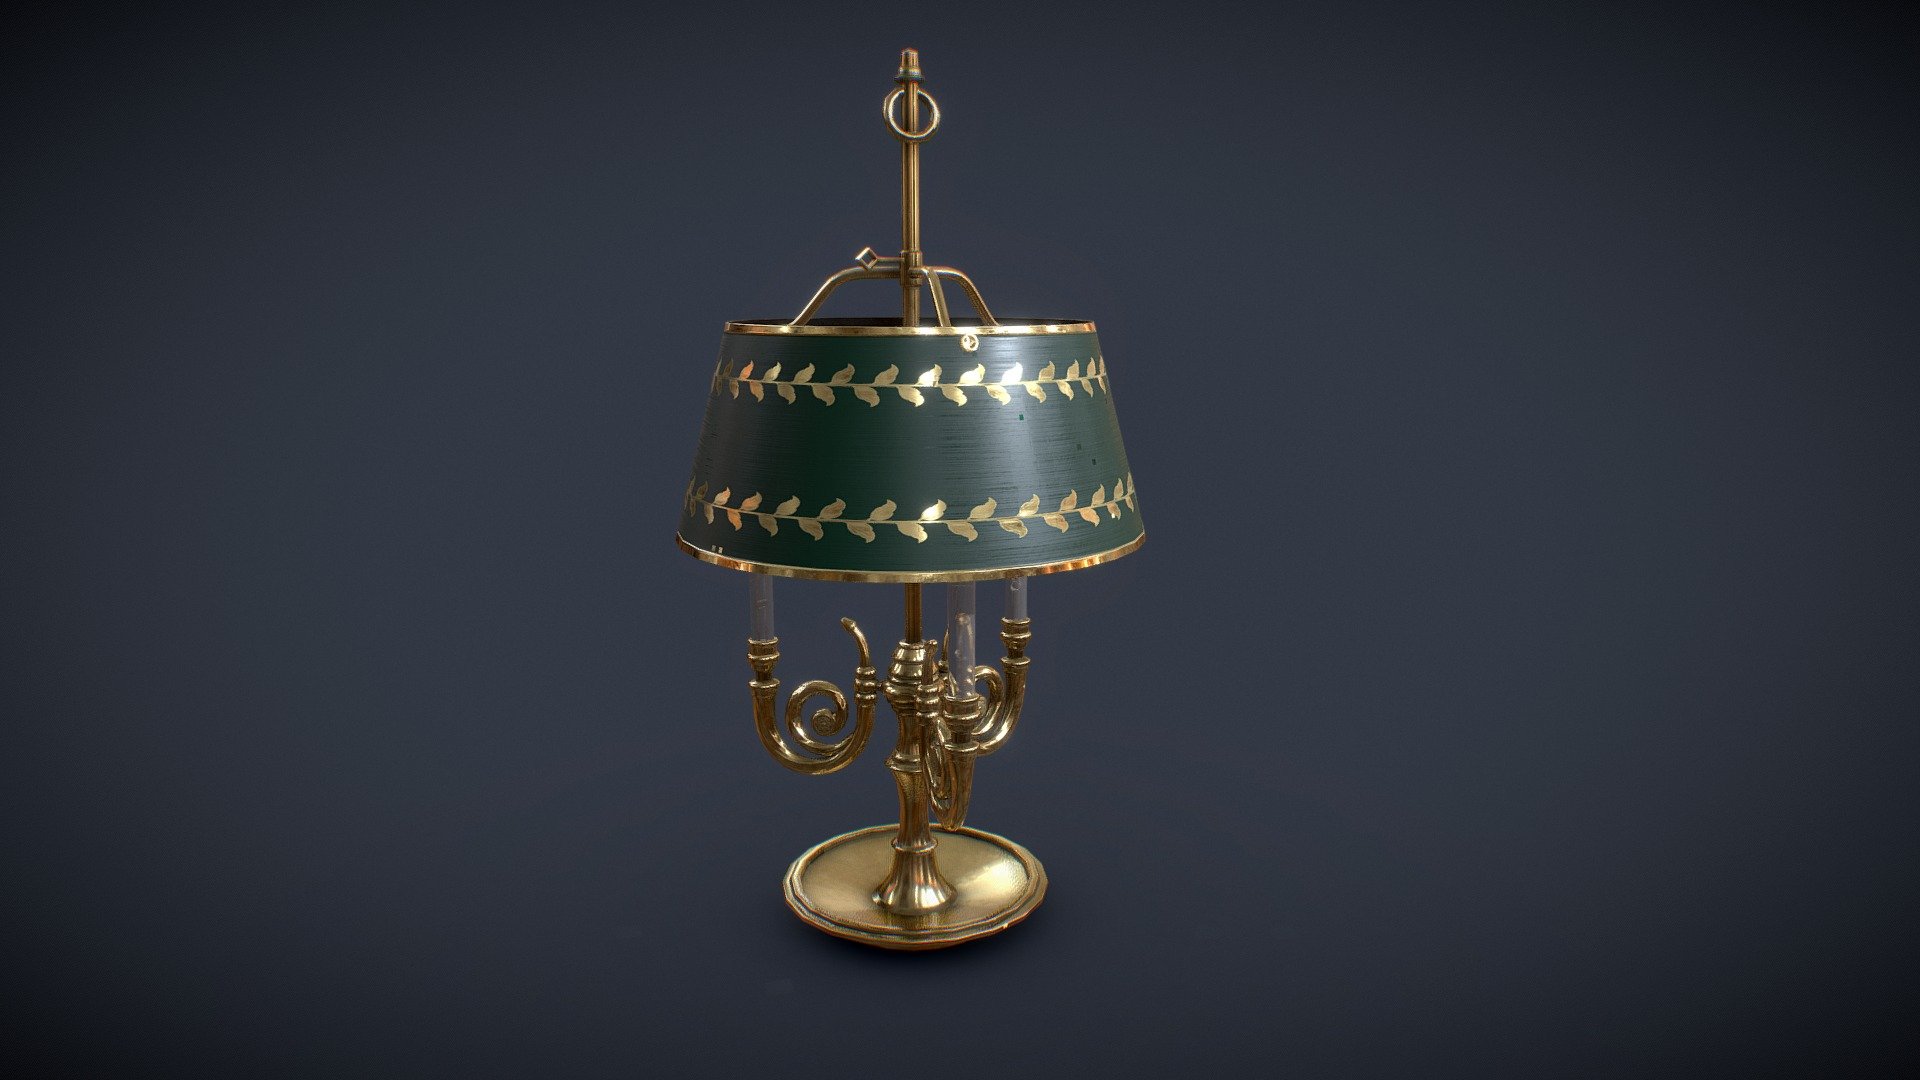 Hello All :) This is a desk lamp made for a personal victorian project. Ligth and shine will be one of the art line of the scene !

Made with Maya, PS and Substance.

You will find in the package Scene file, FBX and 2k Textures.
If you have any customs need, please feel free to contact me 3d model